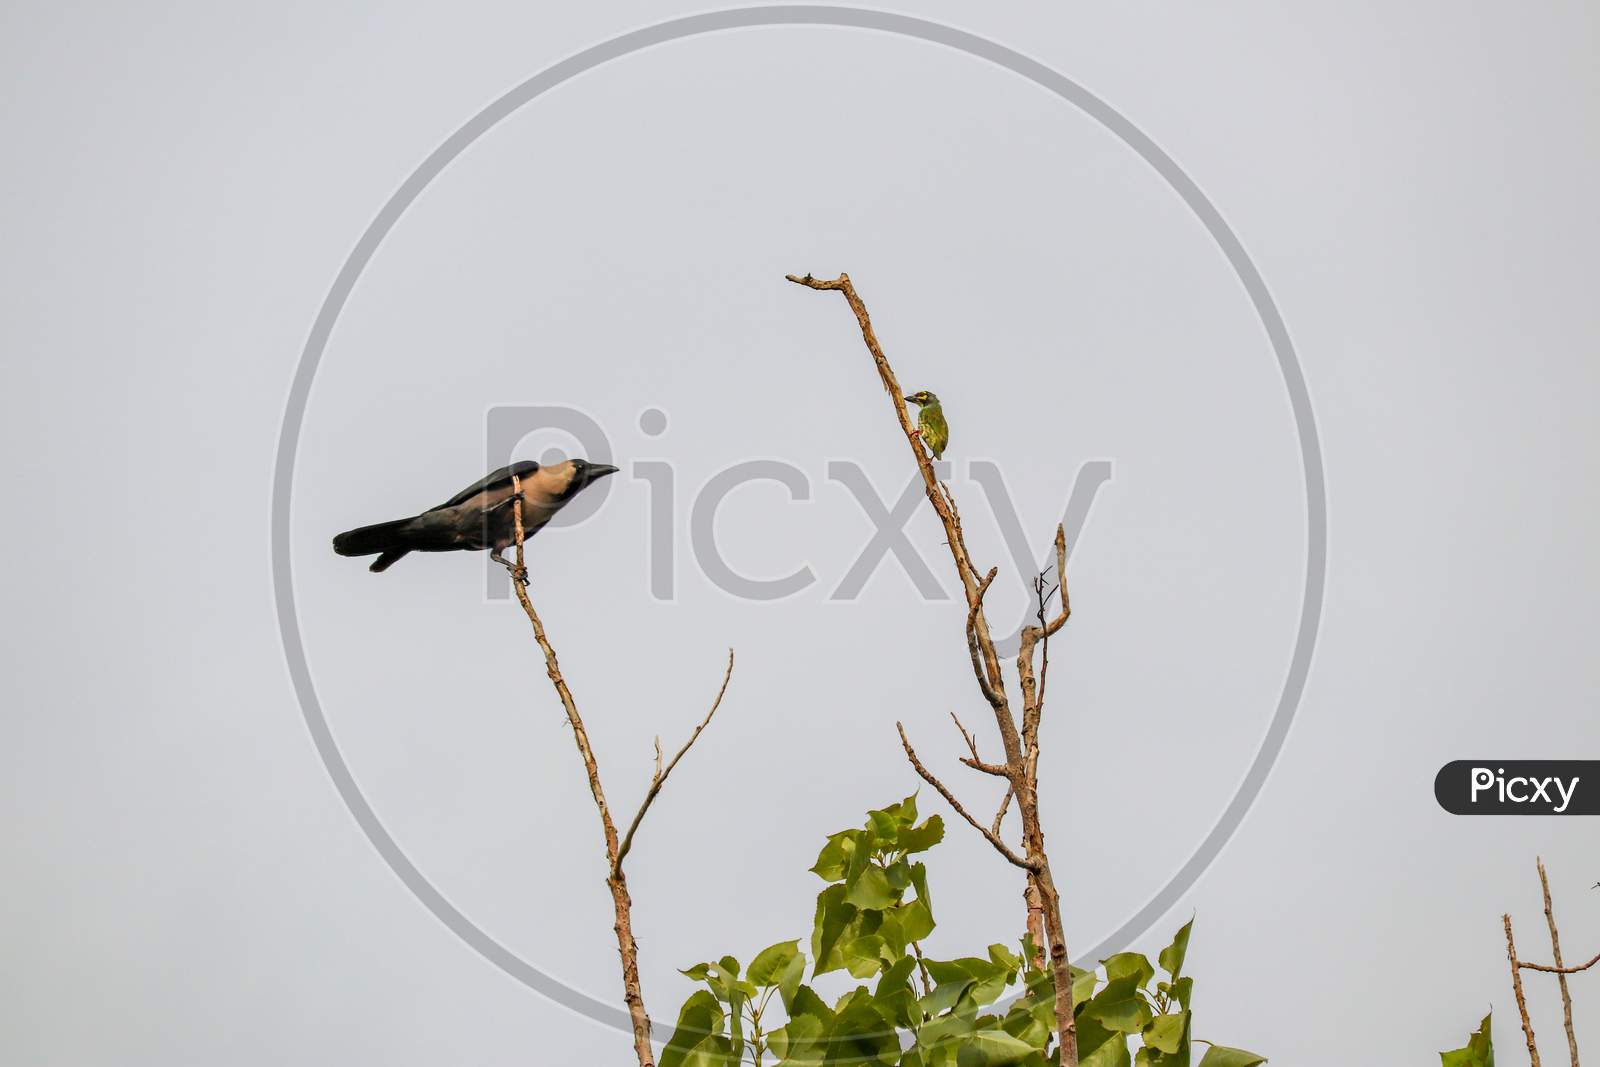 Crow and Barbet siting on a tree